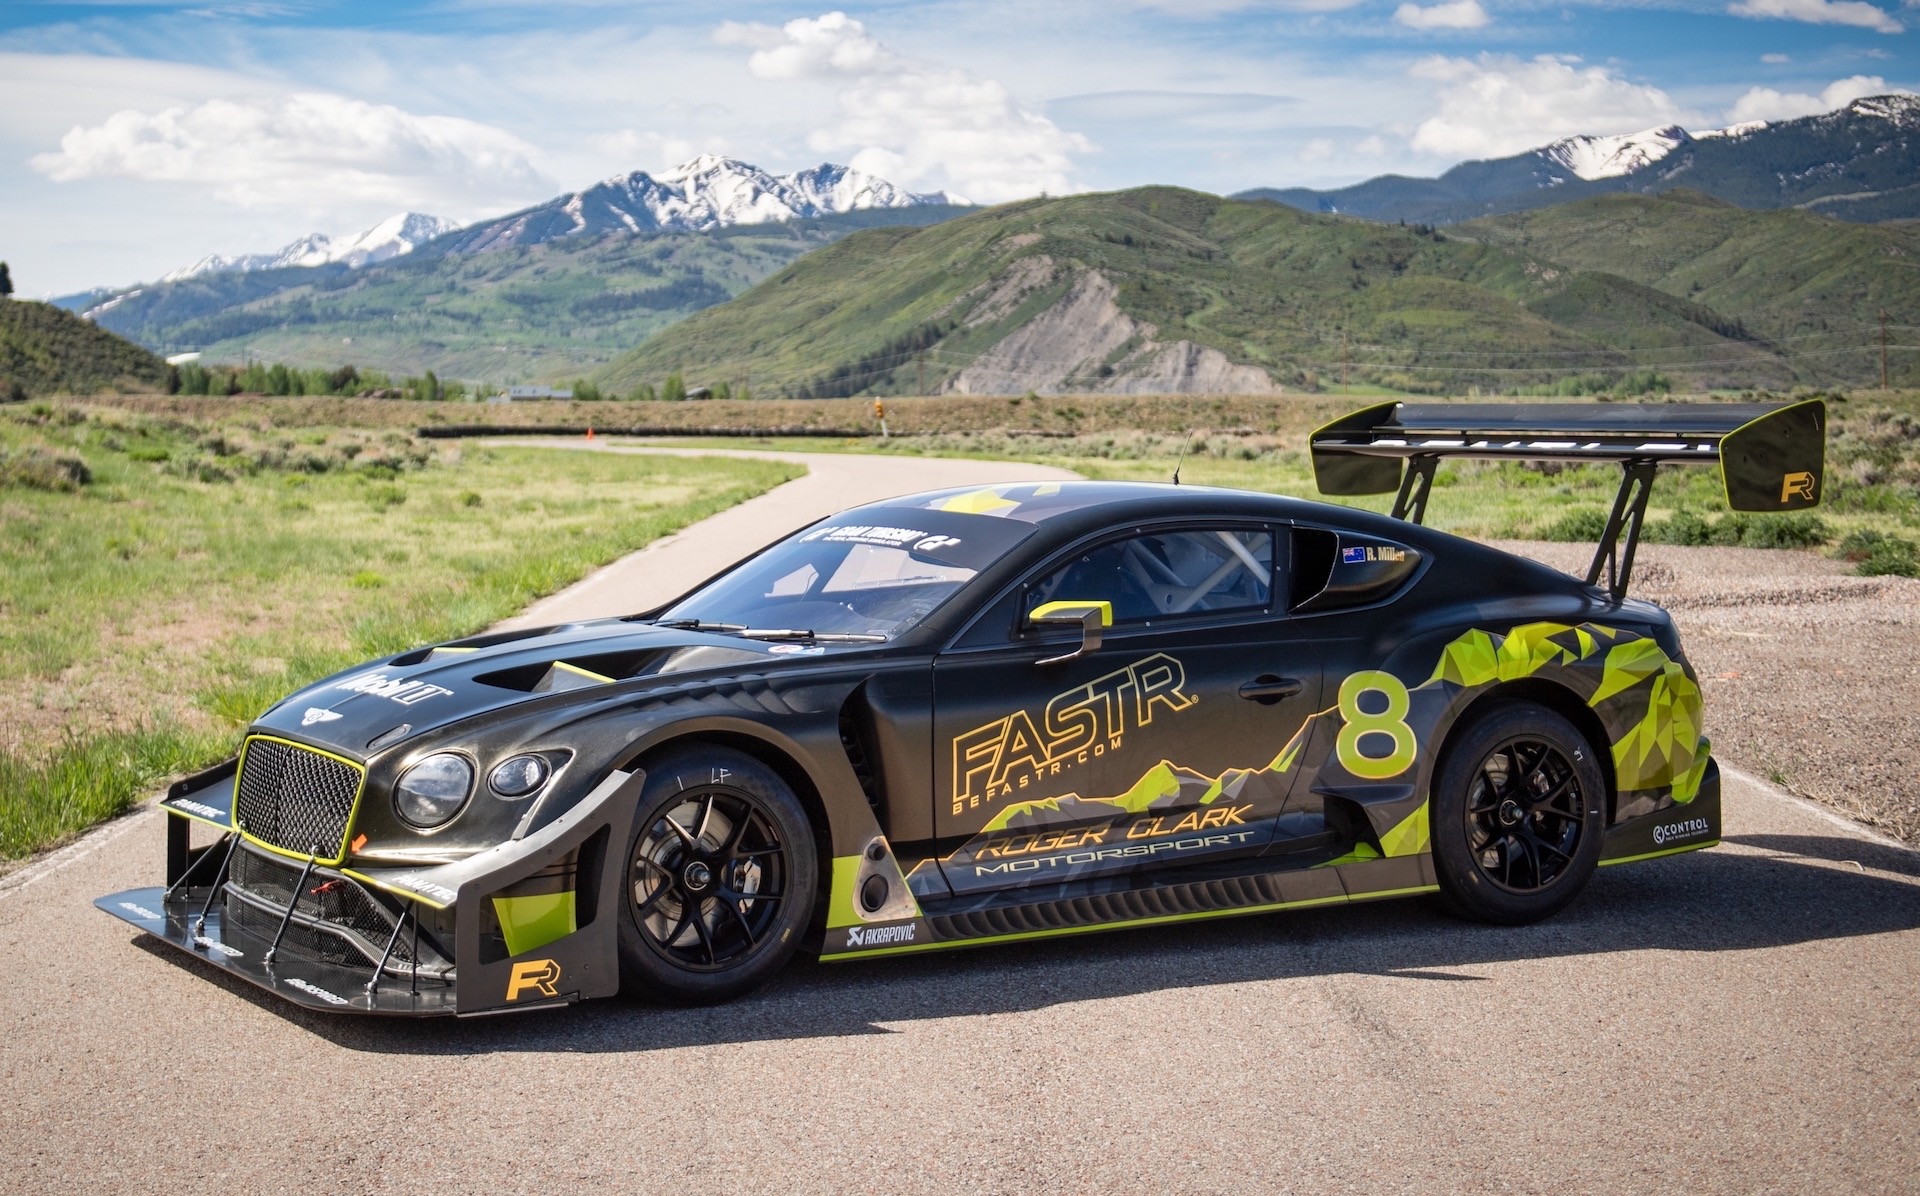 Unstoppable Force: The 2021 Bentley Continental GT3 Pikes Peak